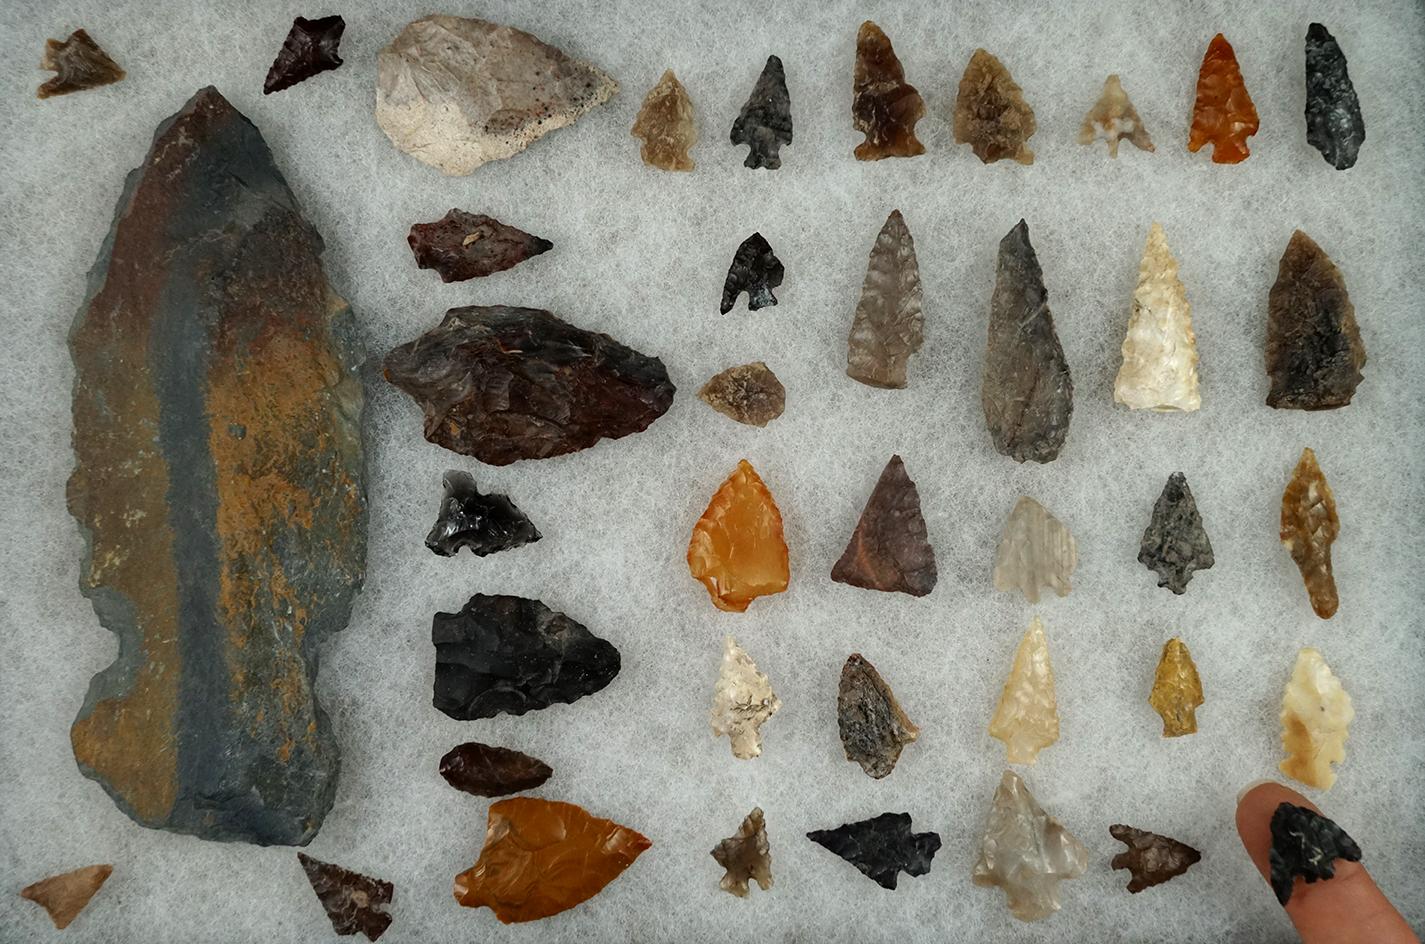 Group of assorted flaked artifacts found near the Columbia River.